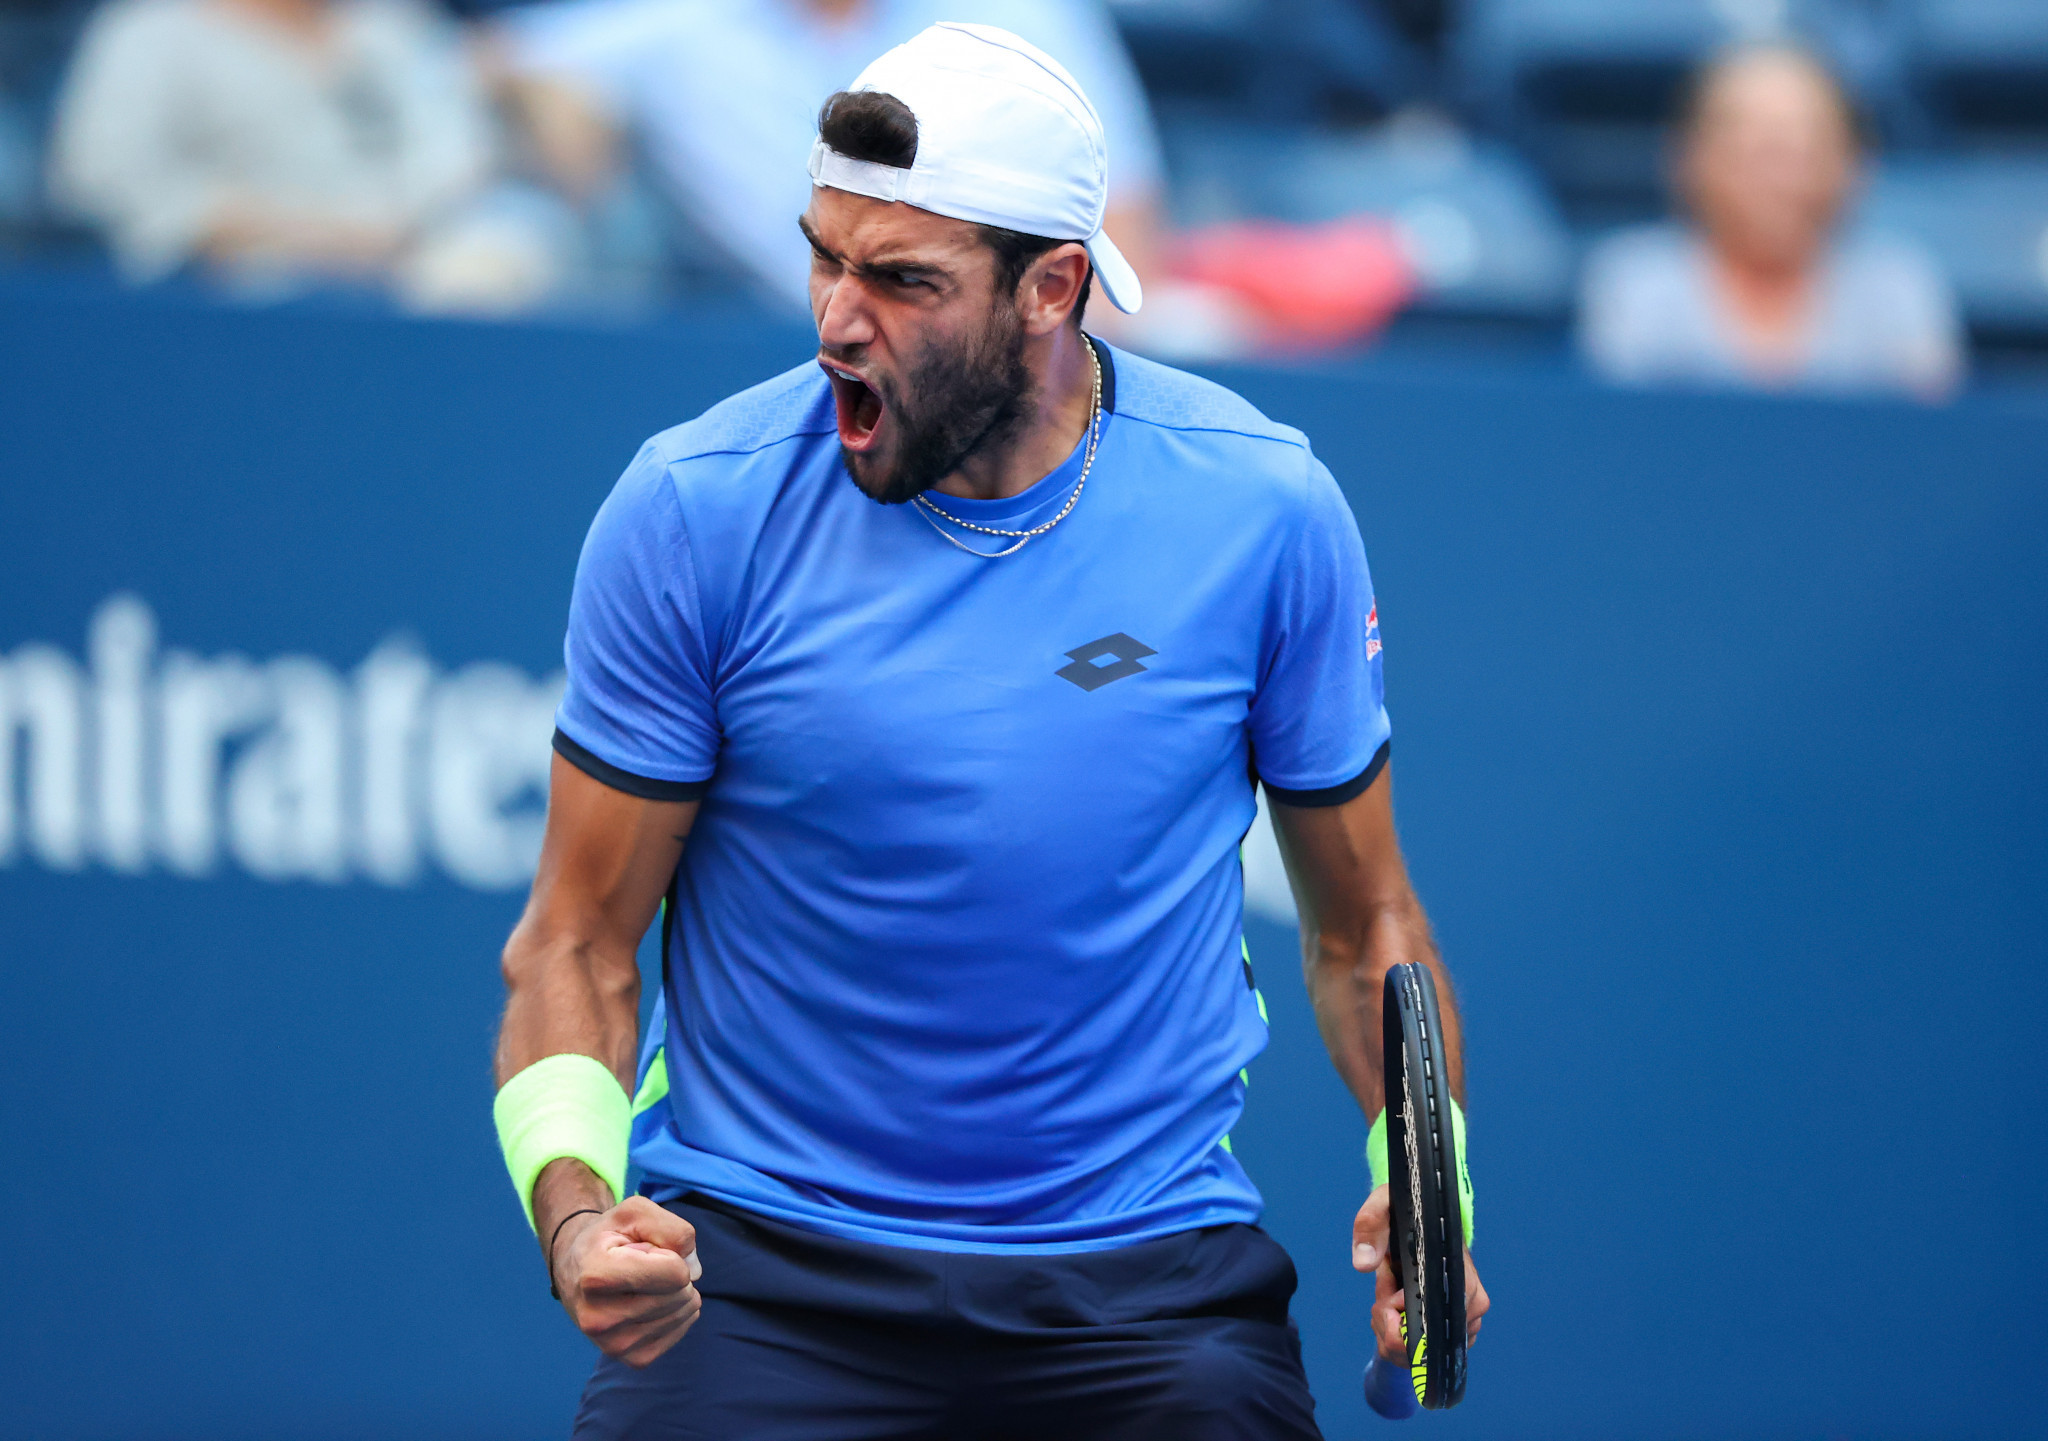 Men's sixth seed Matteo Berrettini recorded a four set win over German qualifier Oscar Otte ©Getty Images